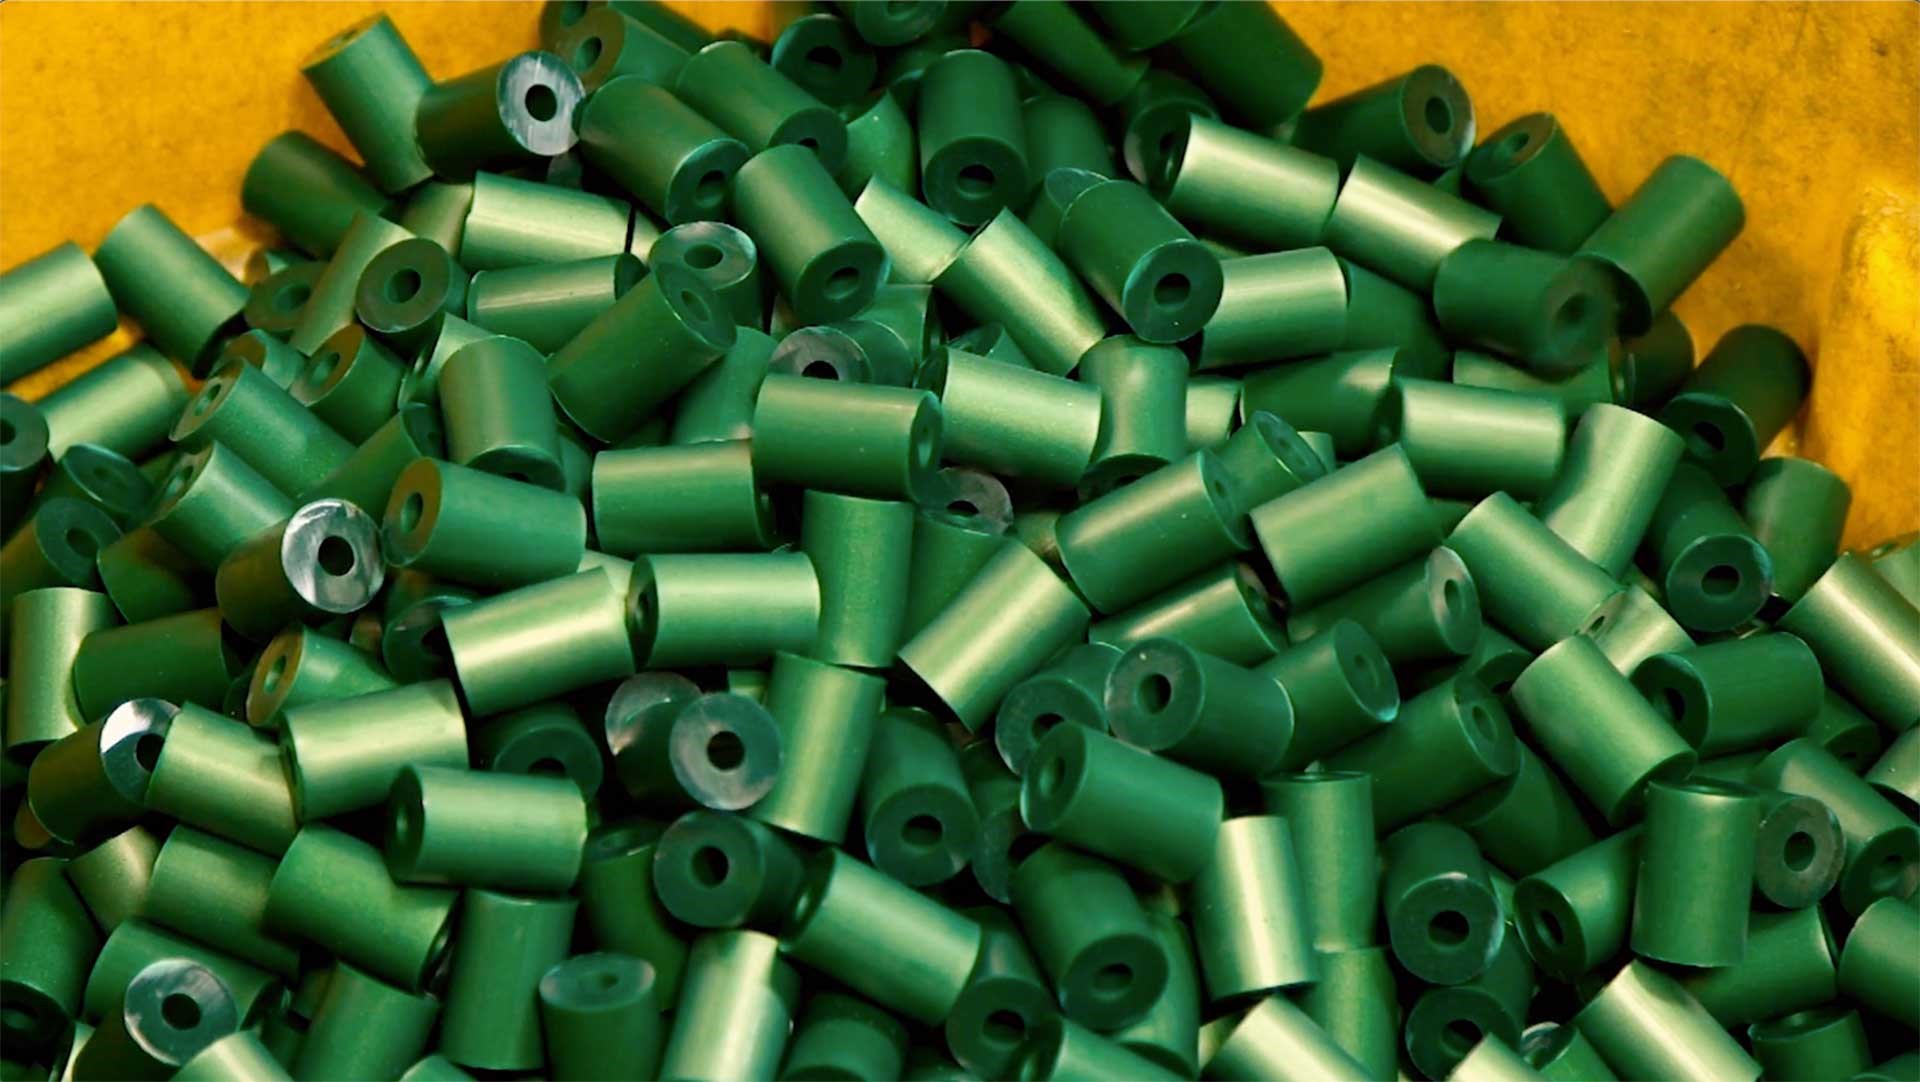 Green plastic extrusions waiting to be formed into shotshell hulls.